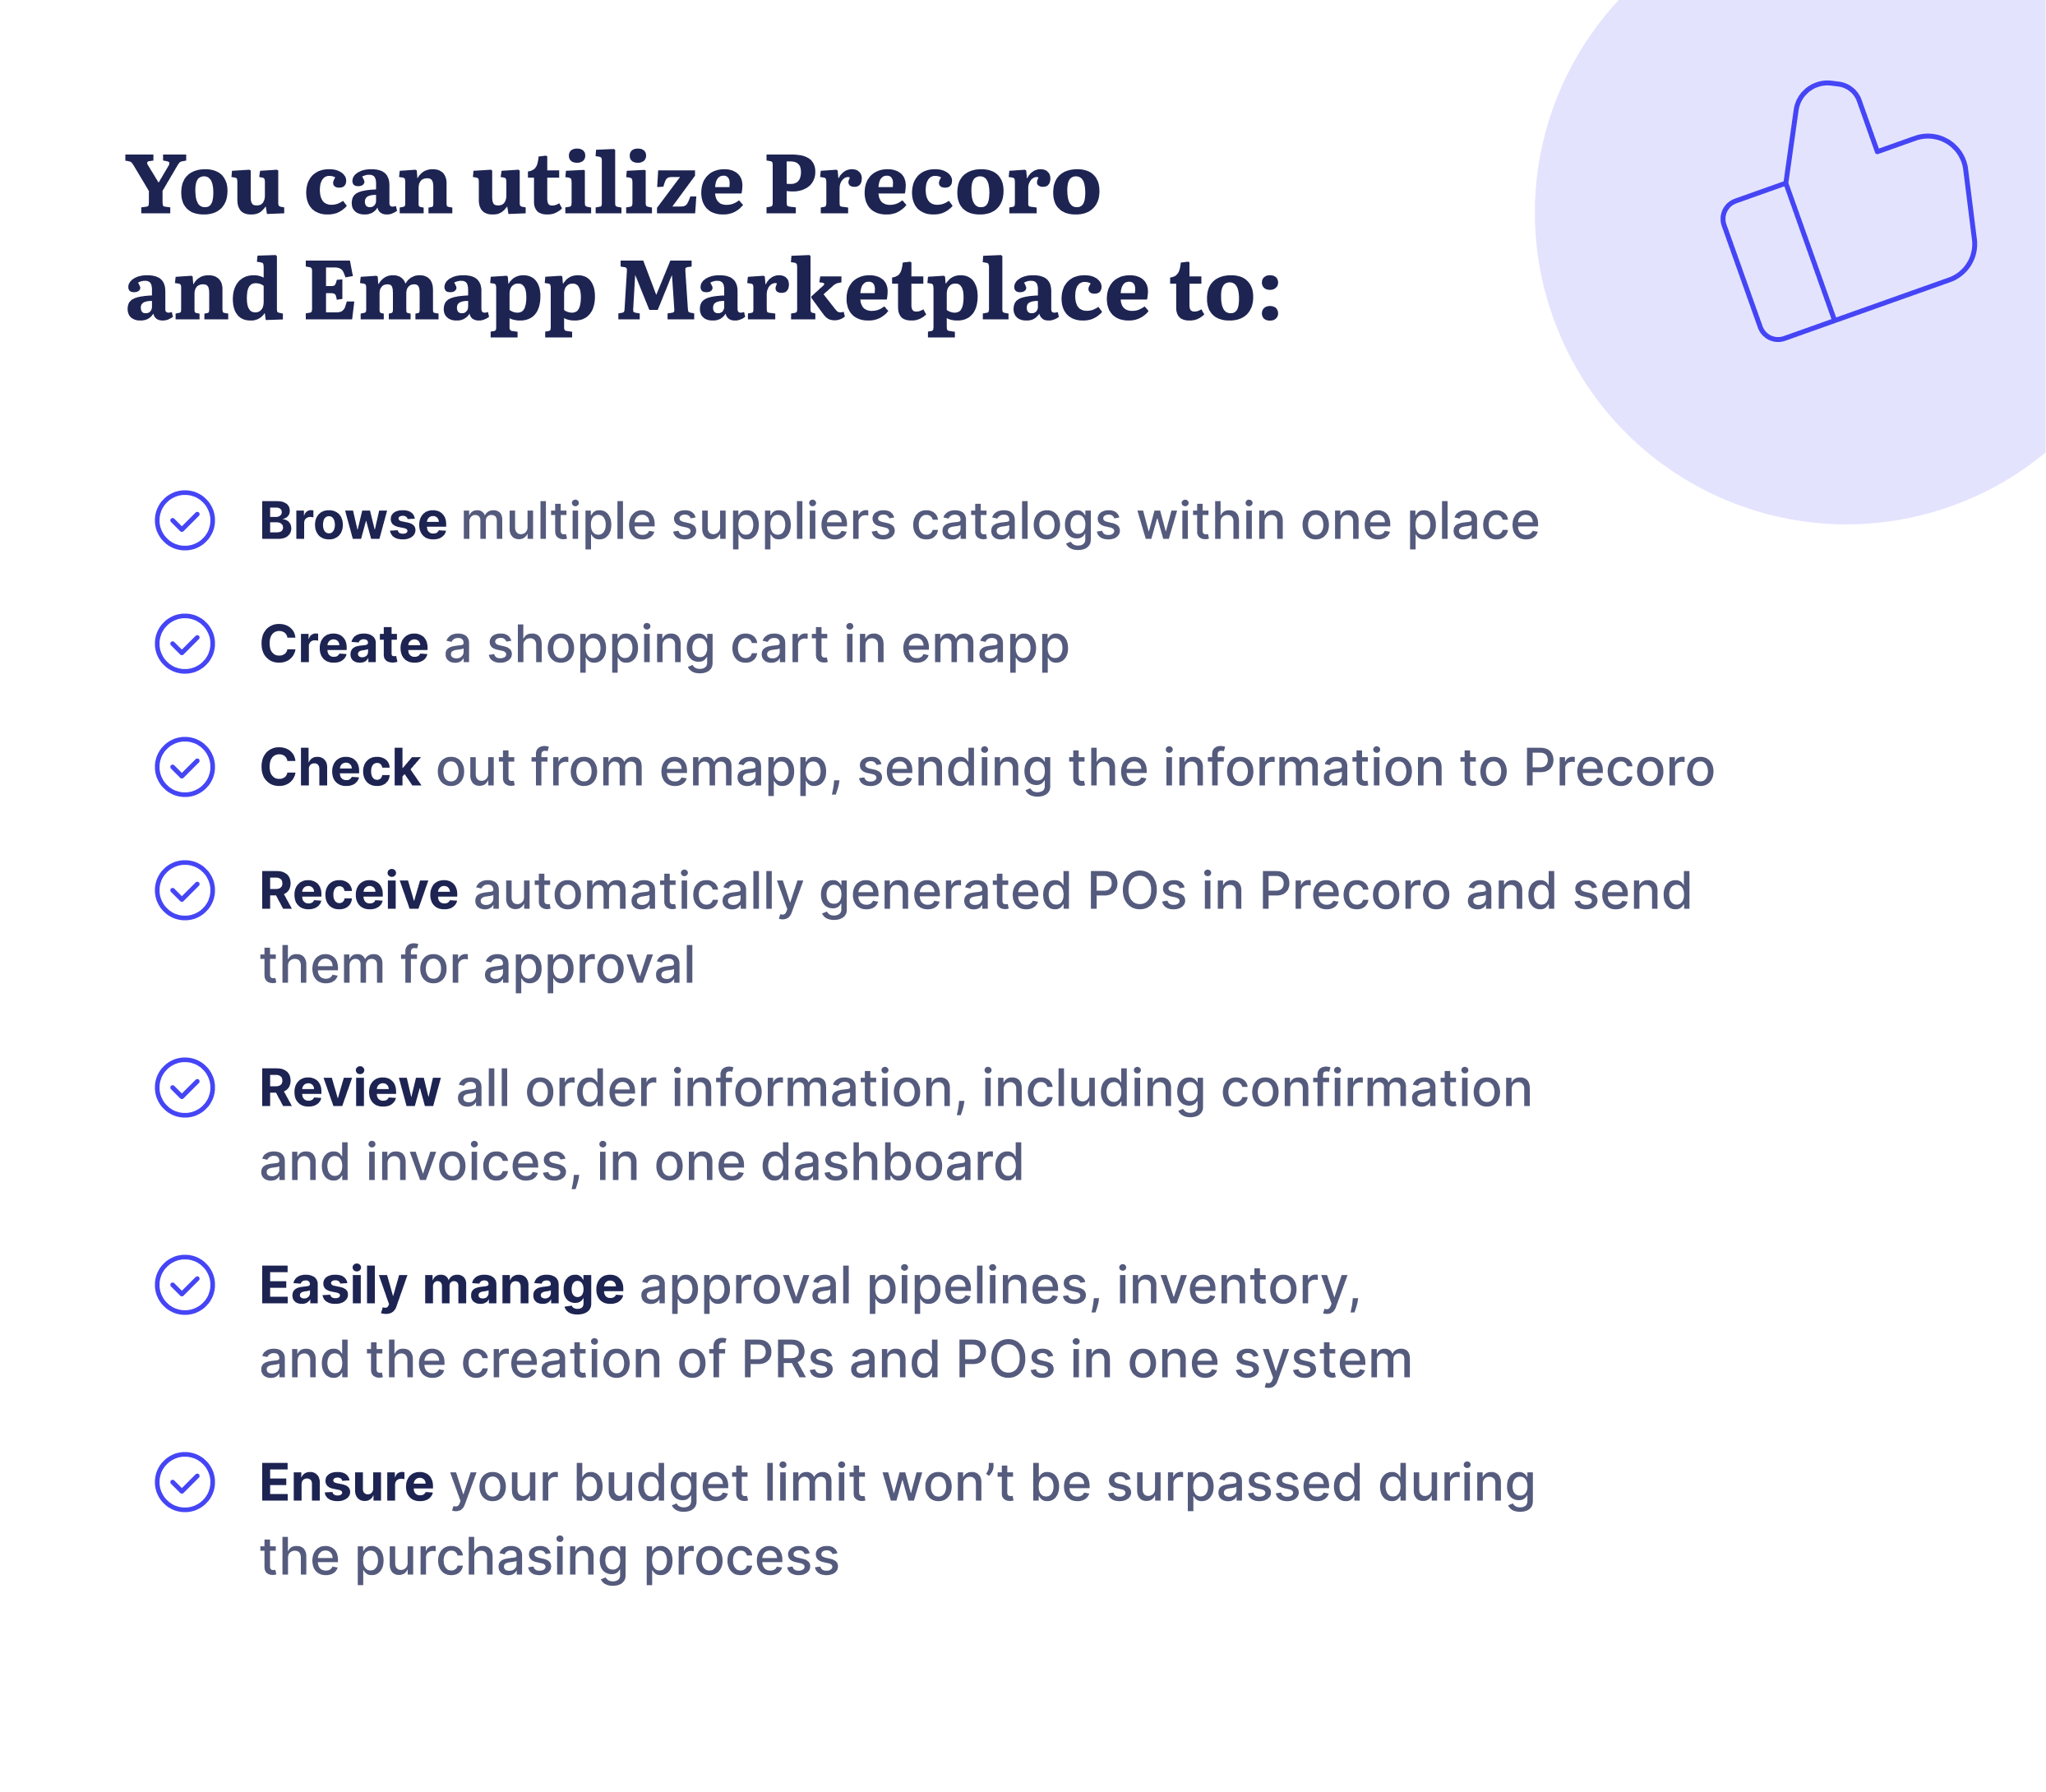 what you can do with precoro and emapp marketplace